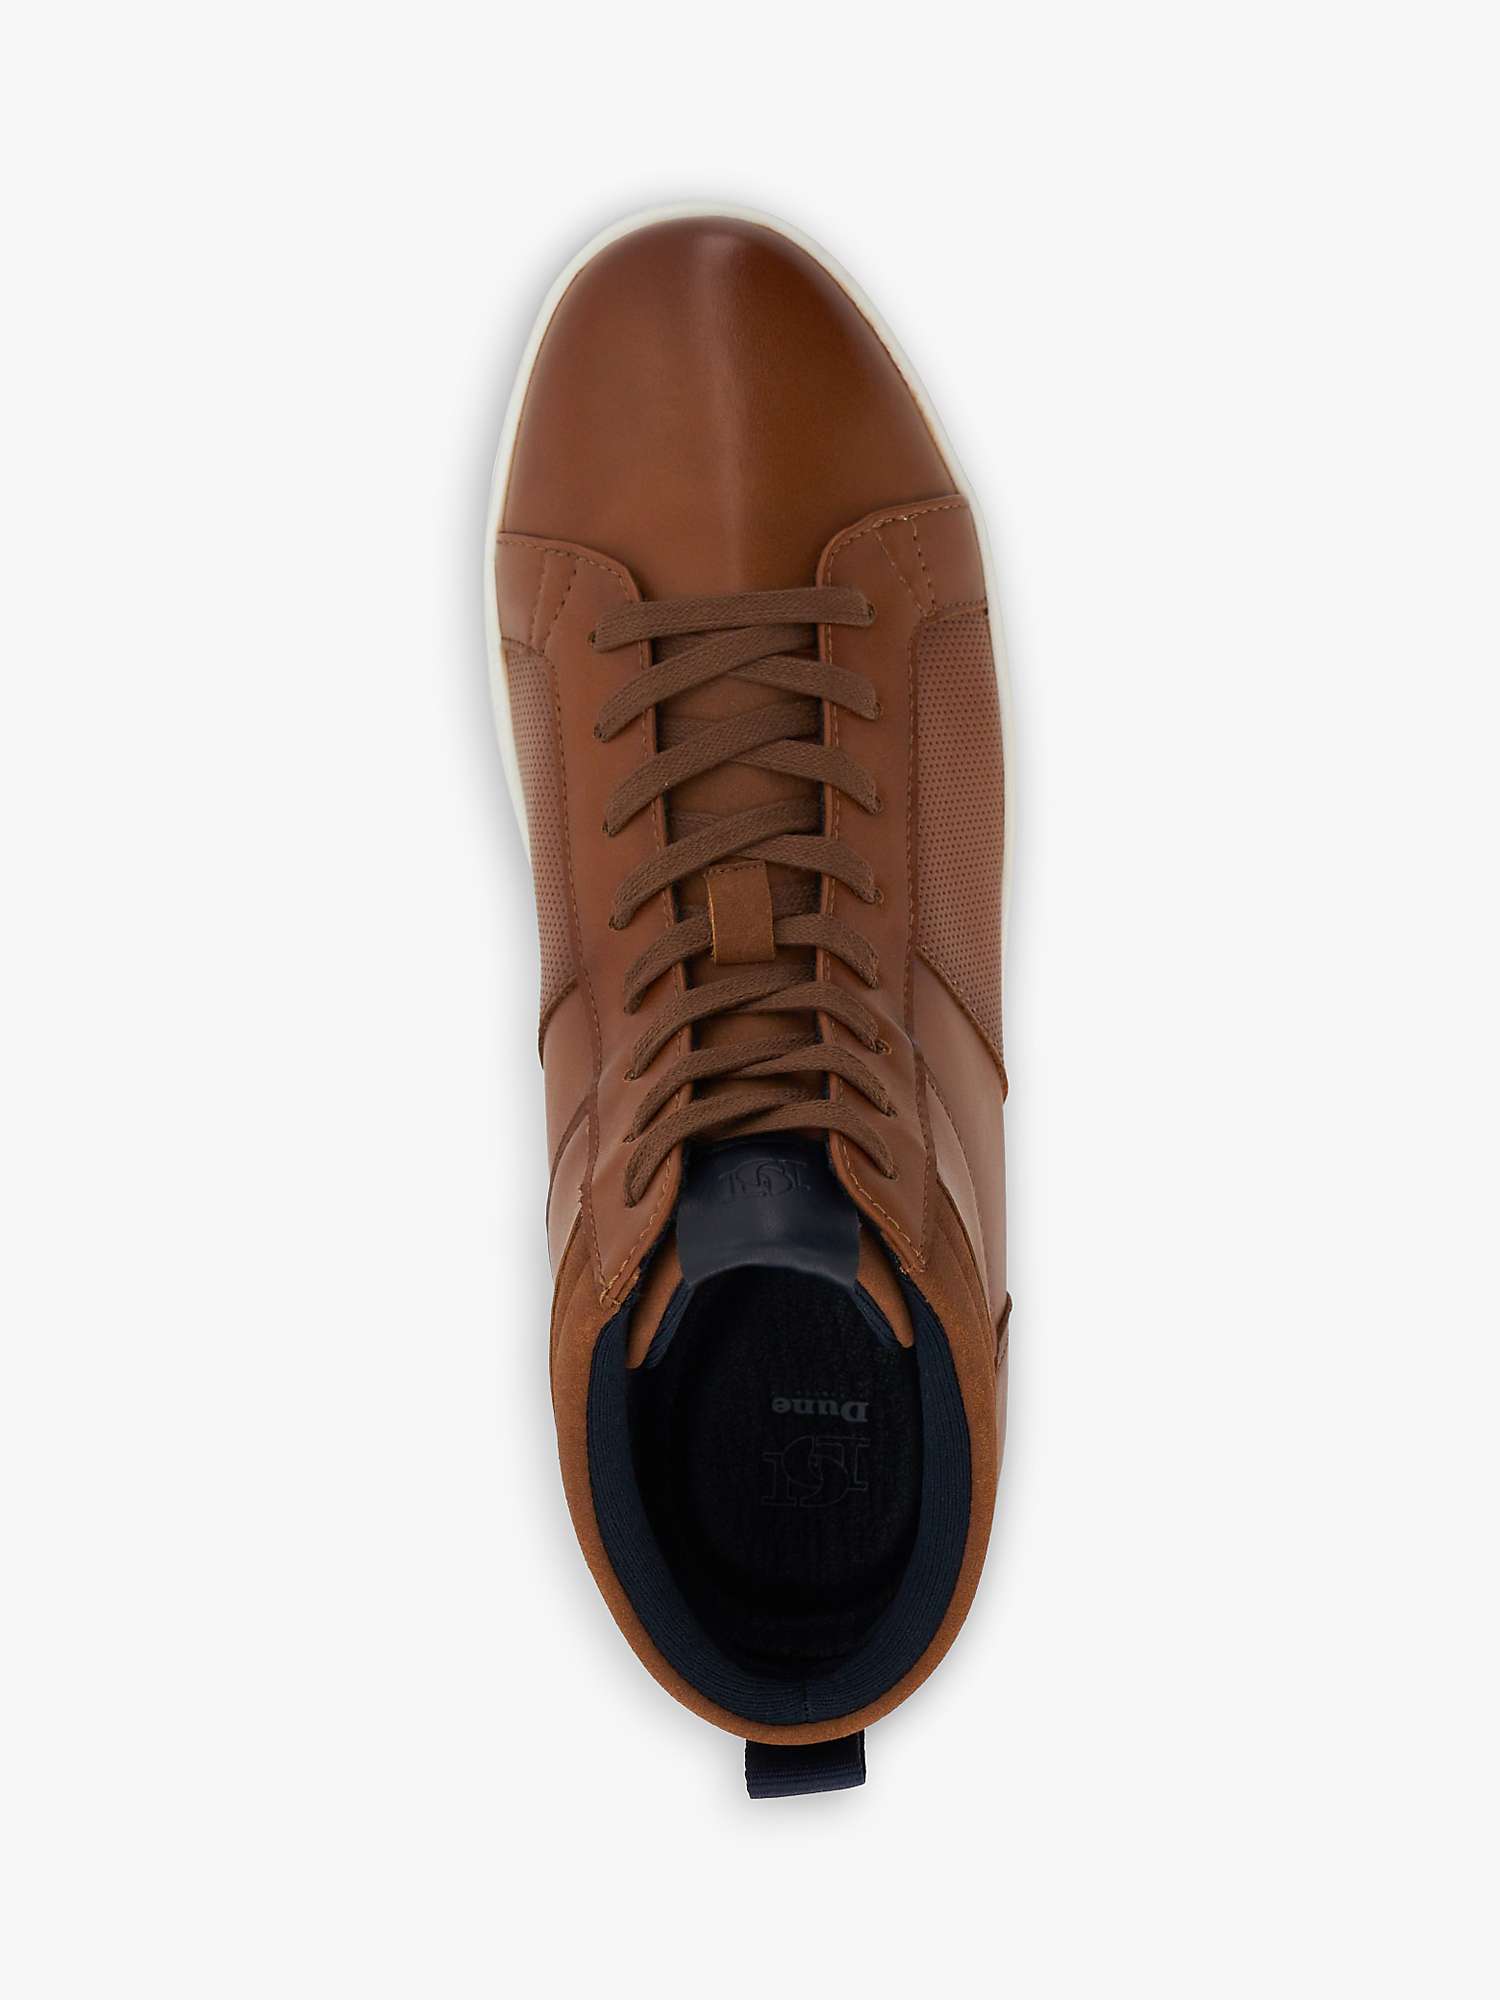 Buy Dune Sezzy Synthetic High-Top Trainers, Tan Online at johnlewis.com